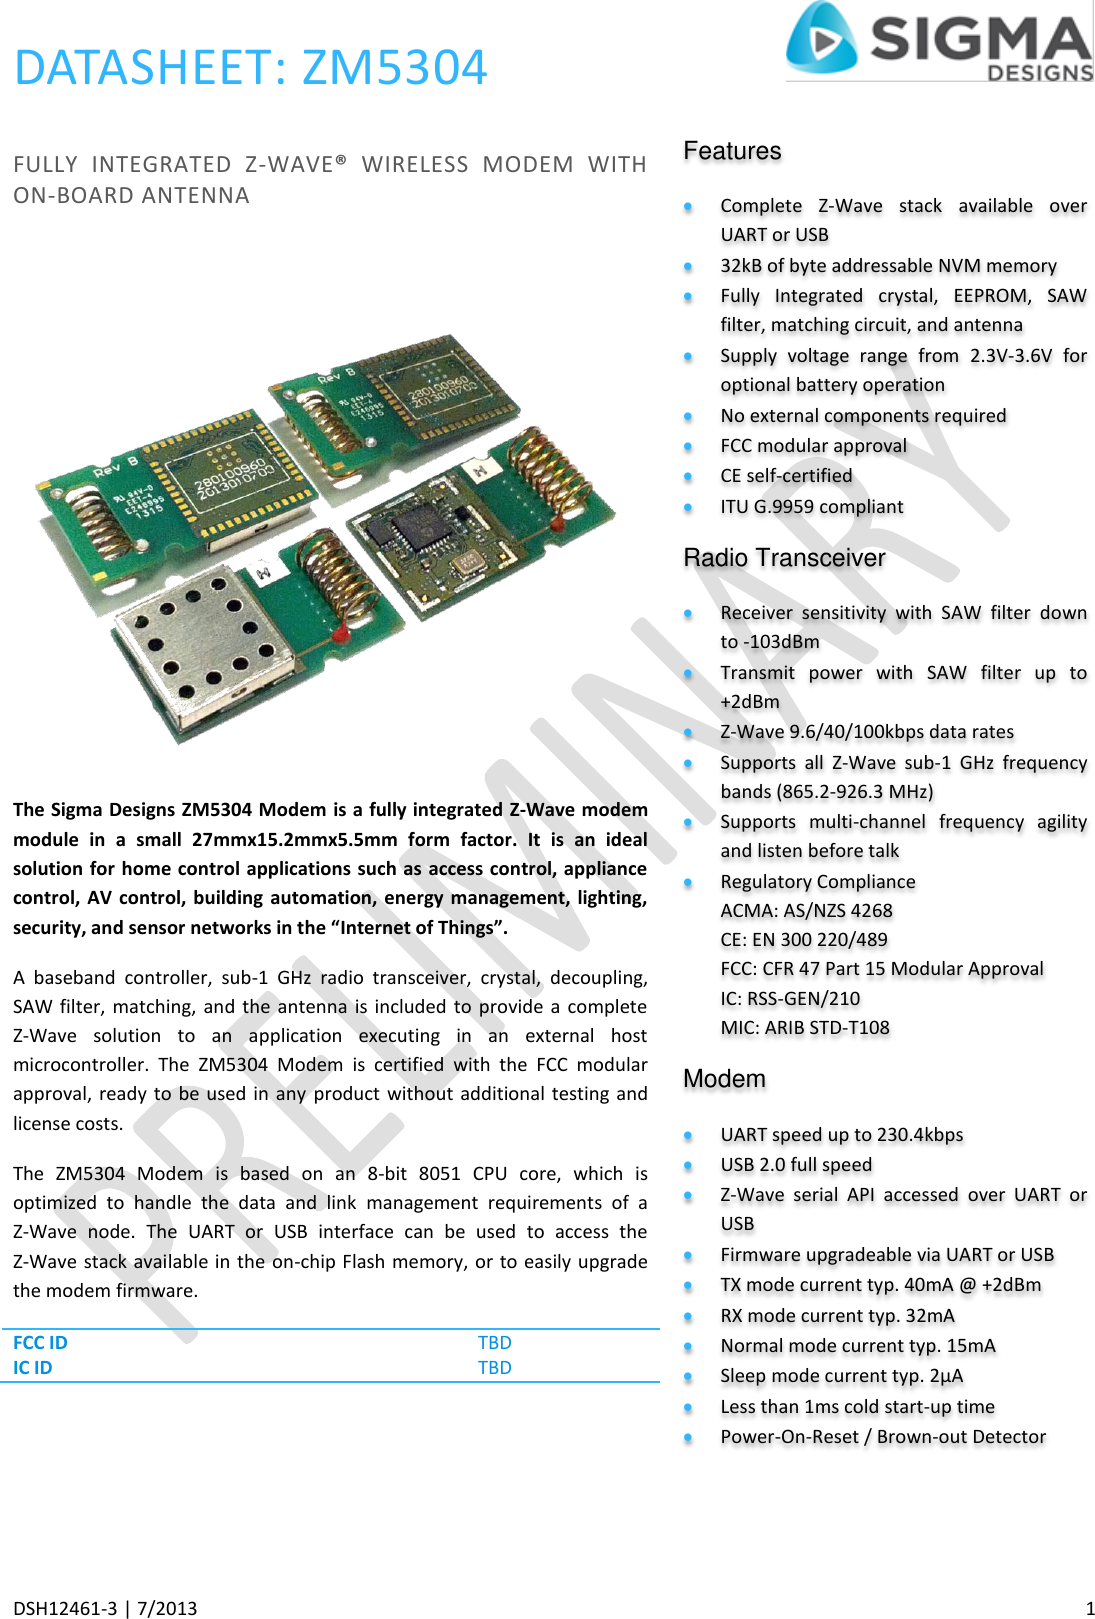 DATASHEET: ZM5304     DSH12461-3 | 7/2013    1 FULLY  INTEGRATED  Z-WAVE®  WIRELESS  MODEM  WITH ON-BOARD ANTENNA  The Sigma Designs ZM5304 Modem is a fully integrated Z-Wave modem module  in  a  small  27mmx15.2mmx5.5mm  form  factor.  It  is  an  ideal solution for home control applications such as access control, appliance control, AV control, building  automation,  energy management,  lighting, security, and sensor networks in the “Internet of Things”. A  baseband  controller,  sub-1  GHz  radio  transceiver,  crystal,  decoupling, SAW filter, matching, and the antenna is included  to  provide  a complete Z-Wave  solution  to  an  application  executing  in  an  external  host microcontroller.  The  ZM5304  Modem  is  certified  with  the  FCC  modular approval, ready to be used in any  product without additional testing and license costs. The  ZM5304  Modem  is  based  on  an  8-bit  8051  CPU  core,  which  is optimized  to  handle  the  data  and  link  management  requirements  of  a Z-Wave  node.  The  UART  or  USB  interface  can  be  used  to  access  the Z-Wave stack available in the on-chip Flash memory, or to easily upgrade the modem firmware. FCC ID TBD IC ID TBD    Features Complete  Z-Wave  stack  available  over UART or USB 32kB of byte addressable NVM memory  Fully  Integrated  crystal,  EEPROM,  SAW filter, matching circuit, and antenna Supply  voltage  range  from  2.3V-3.6V  for optional battery operation No external components required FCC modular approval CE self-certified ITU G.9959 compliant Radio Transceiver Receiver  sensitivity  with  SAW  filter  down to -103dBm Transmit  power  with  SAW  filter  up  to +2dBm Z-Wave 9.6/40/100kbps data rates Supports  all  Z-Wave  sub-1  GHz  frequency bands (865.2-926.3 MHz) Supports  multi-channel  frequency  agility and listen before talk Regulatory Compliance ACMA: AS/NZS 4268 CE: EN 300 220/489 FCC: CFR 47 Part 15 Modular Approval IC: RSS-GEN/210 MIC: ARIB STD-T108 Modem UART speed up to 230.4kbps USB 2.0 full speed Z-Wave  serial  API  accessed  over  UART  or USB Firmware upgradeable via UART or USB TX mode current typ. 40mA @ +2dBm RX mode current typ. 32mA Normal mode current typ. 15mA Sleep mode current typ. 2µA Less than 1ms cold start-up time Power-On-Reset / Brown-out Detector 